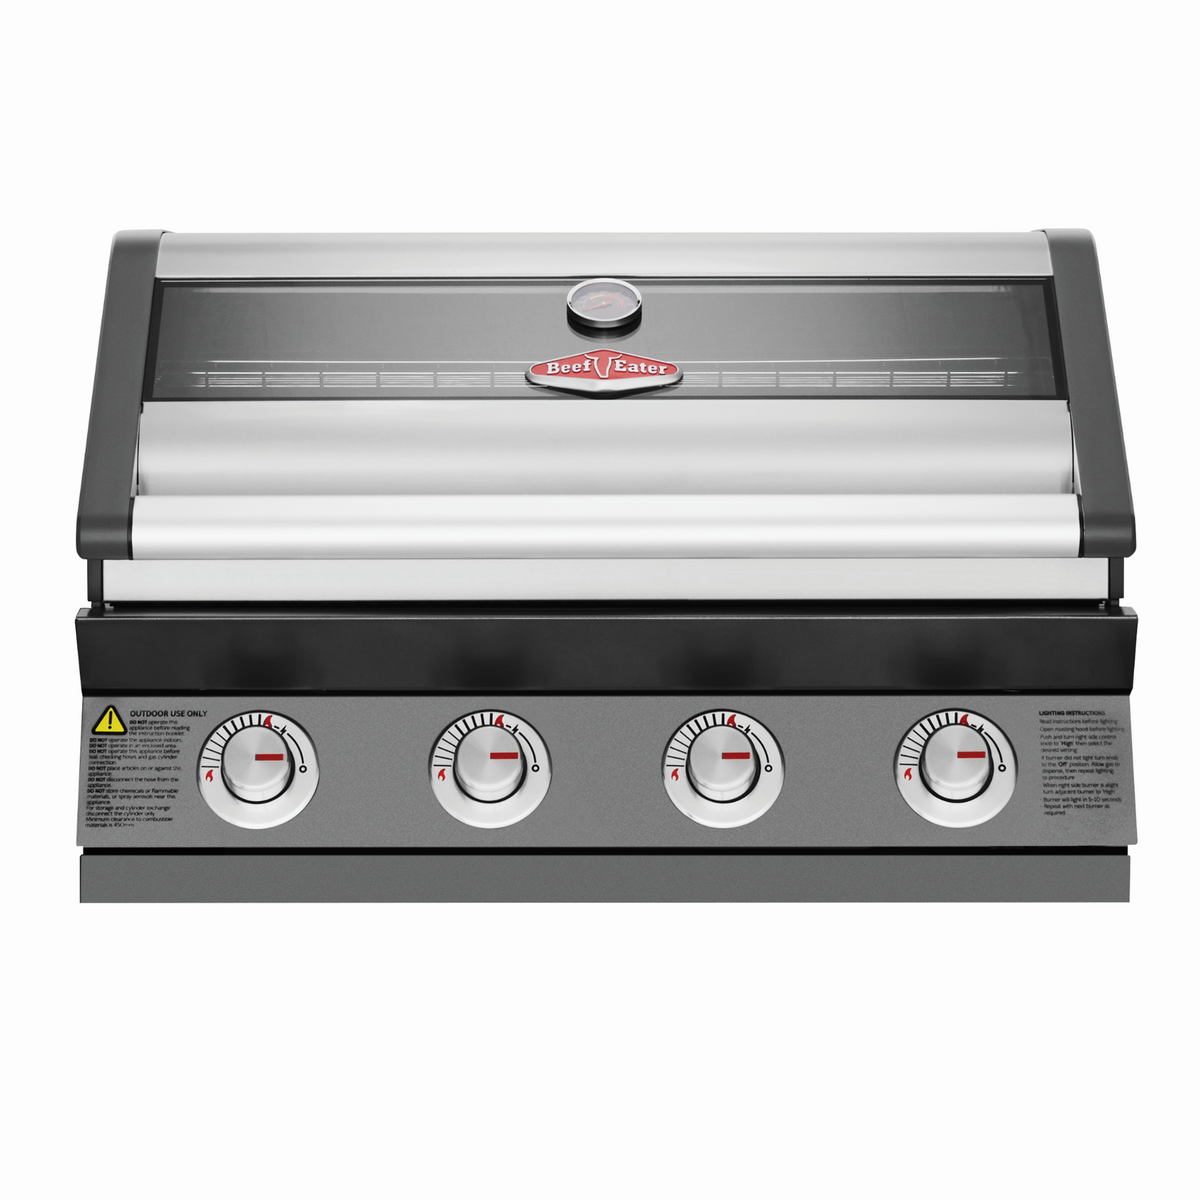 BeefEater 1600E Series 4 Burner Build In Gas Barbecue